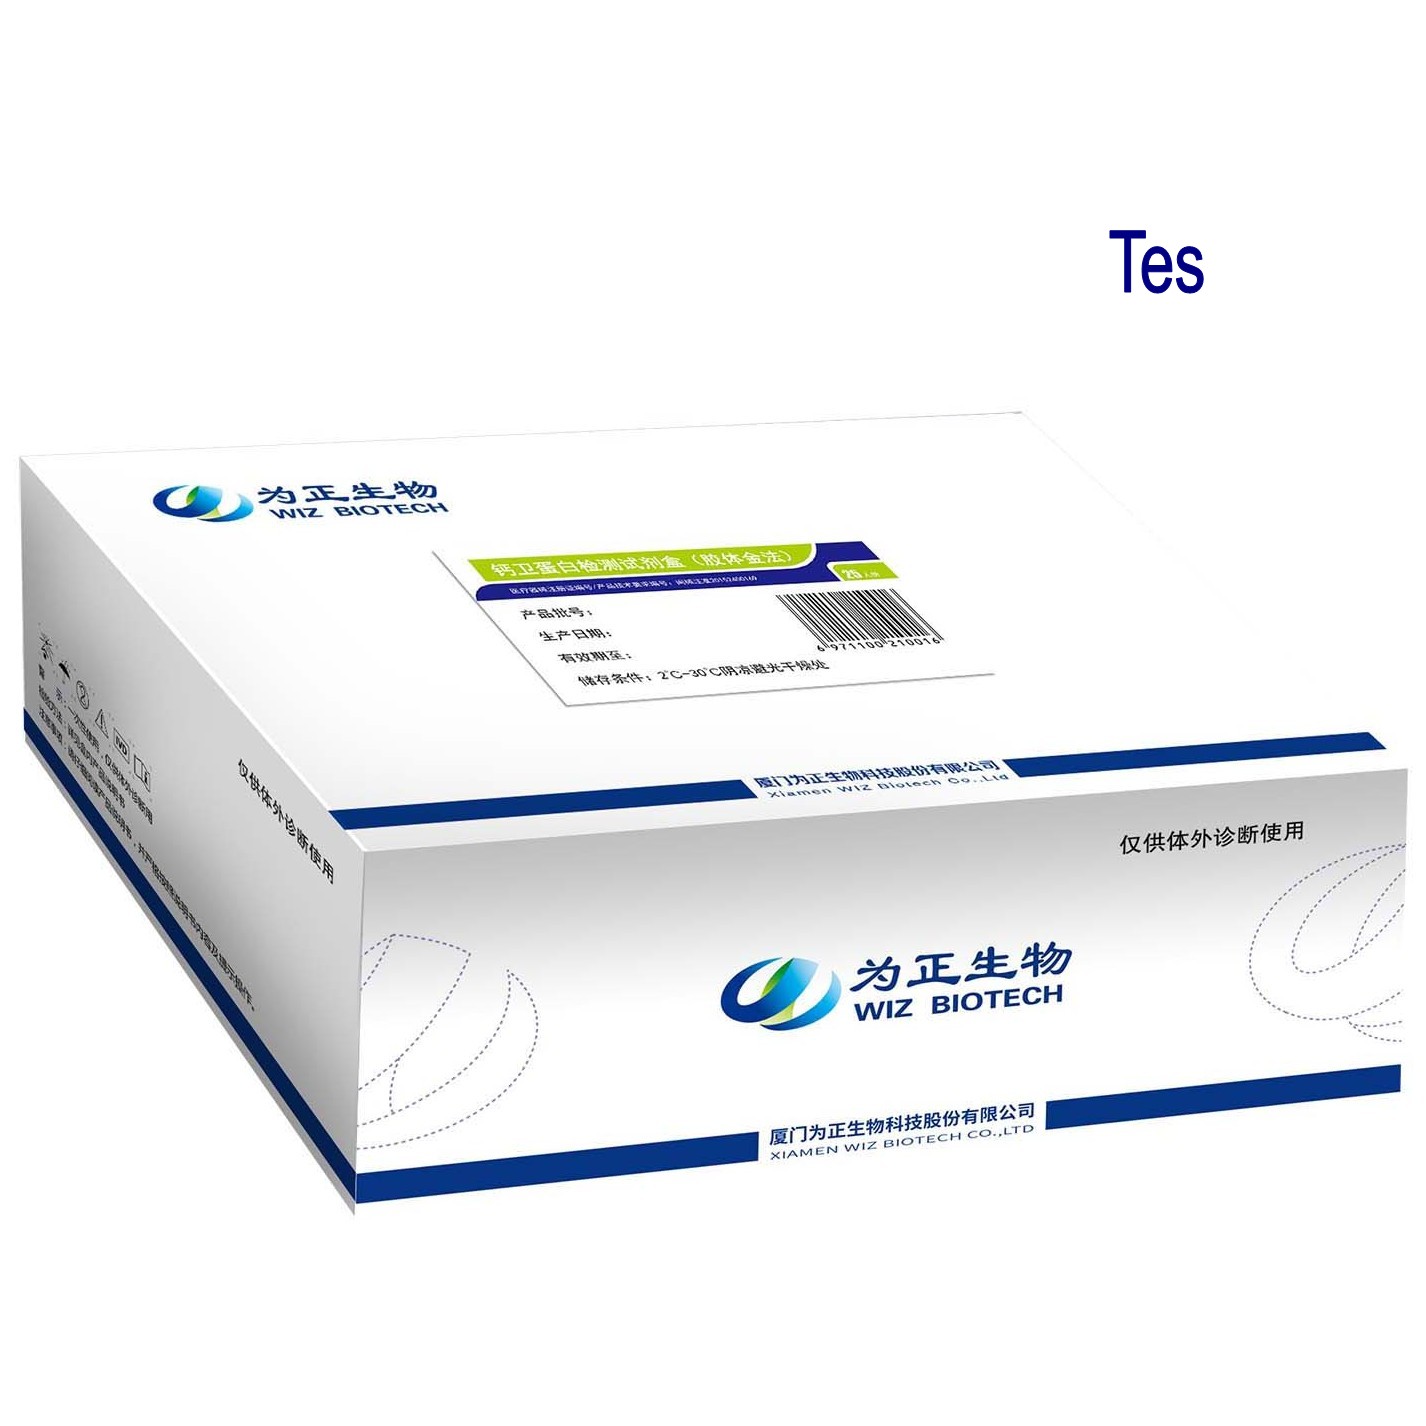 Special Design for Dengue Ns1 Antigen With Attractive Price - Diagnostic Kit for Testosterone  (fluorescence immunochromatographic assay) – Baysen